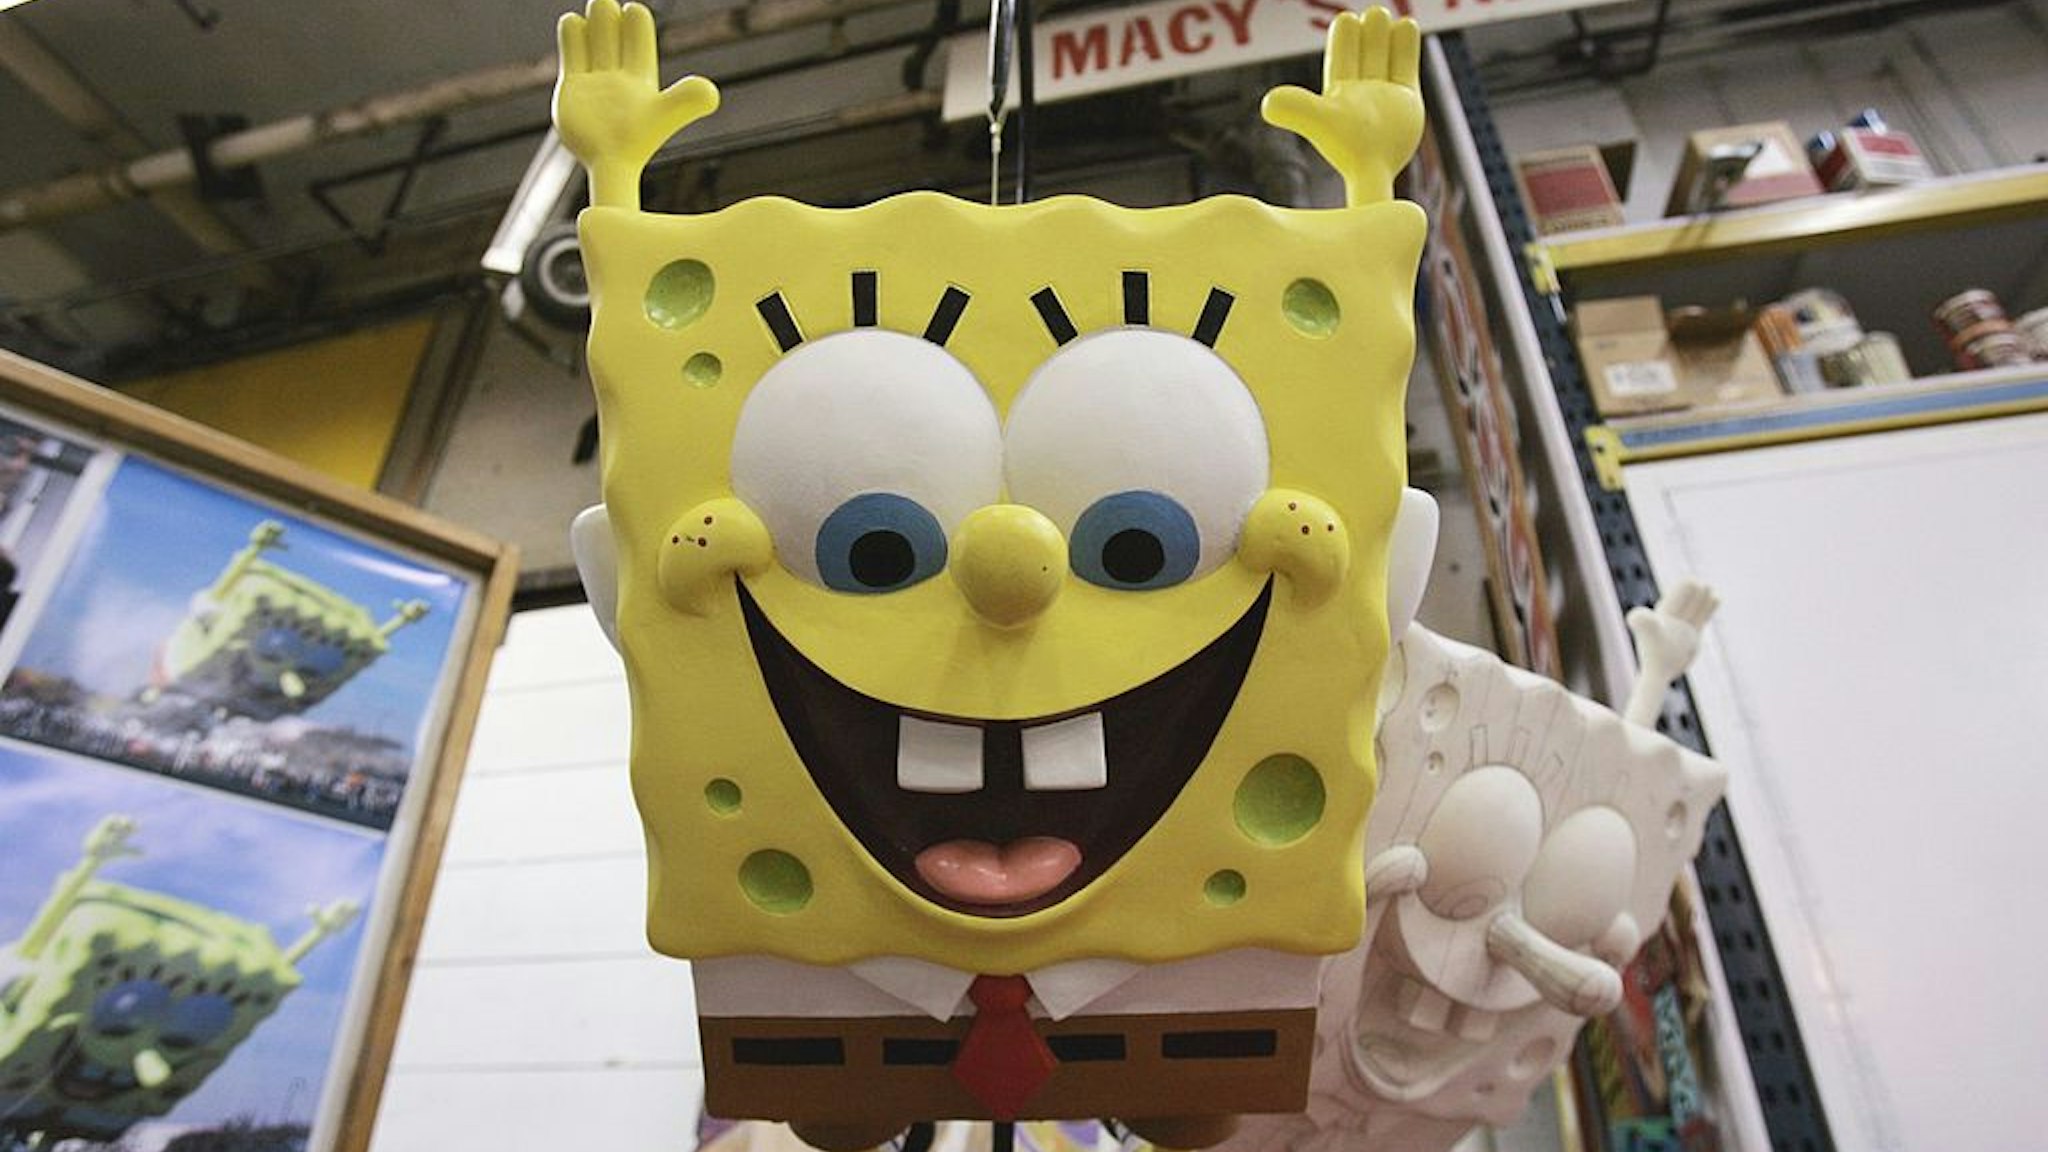 Final painted model and white pattern model for Nickelodeon's SpongeBob SquarePants balloon on Preview Day at Macy's Studios in Hoboken, NJ prior to the 2004 Macy's Thanksgiving Day Parade